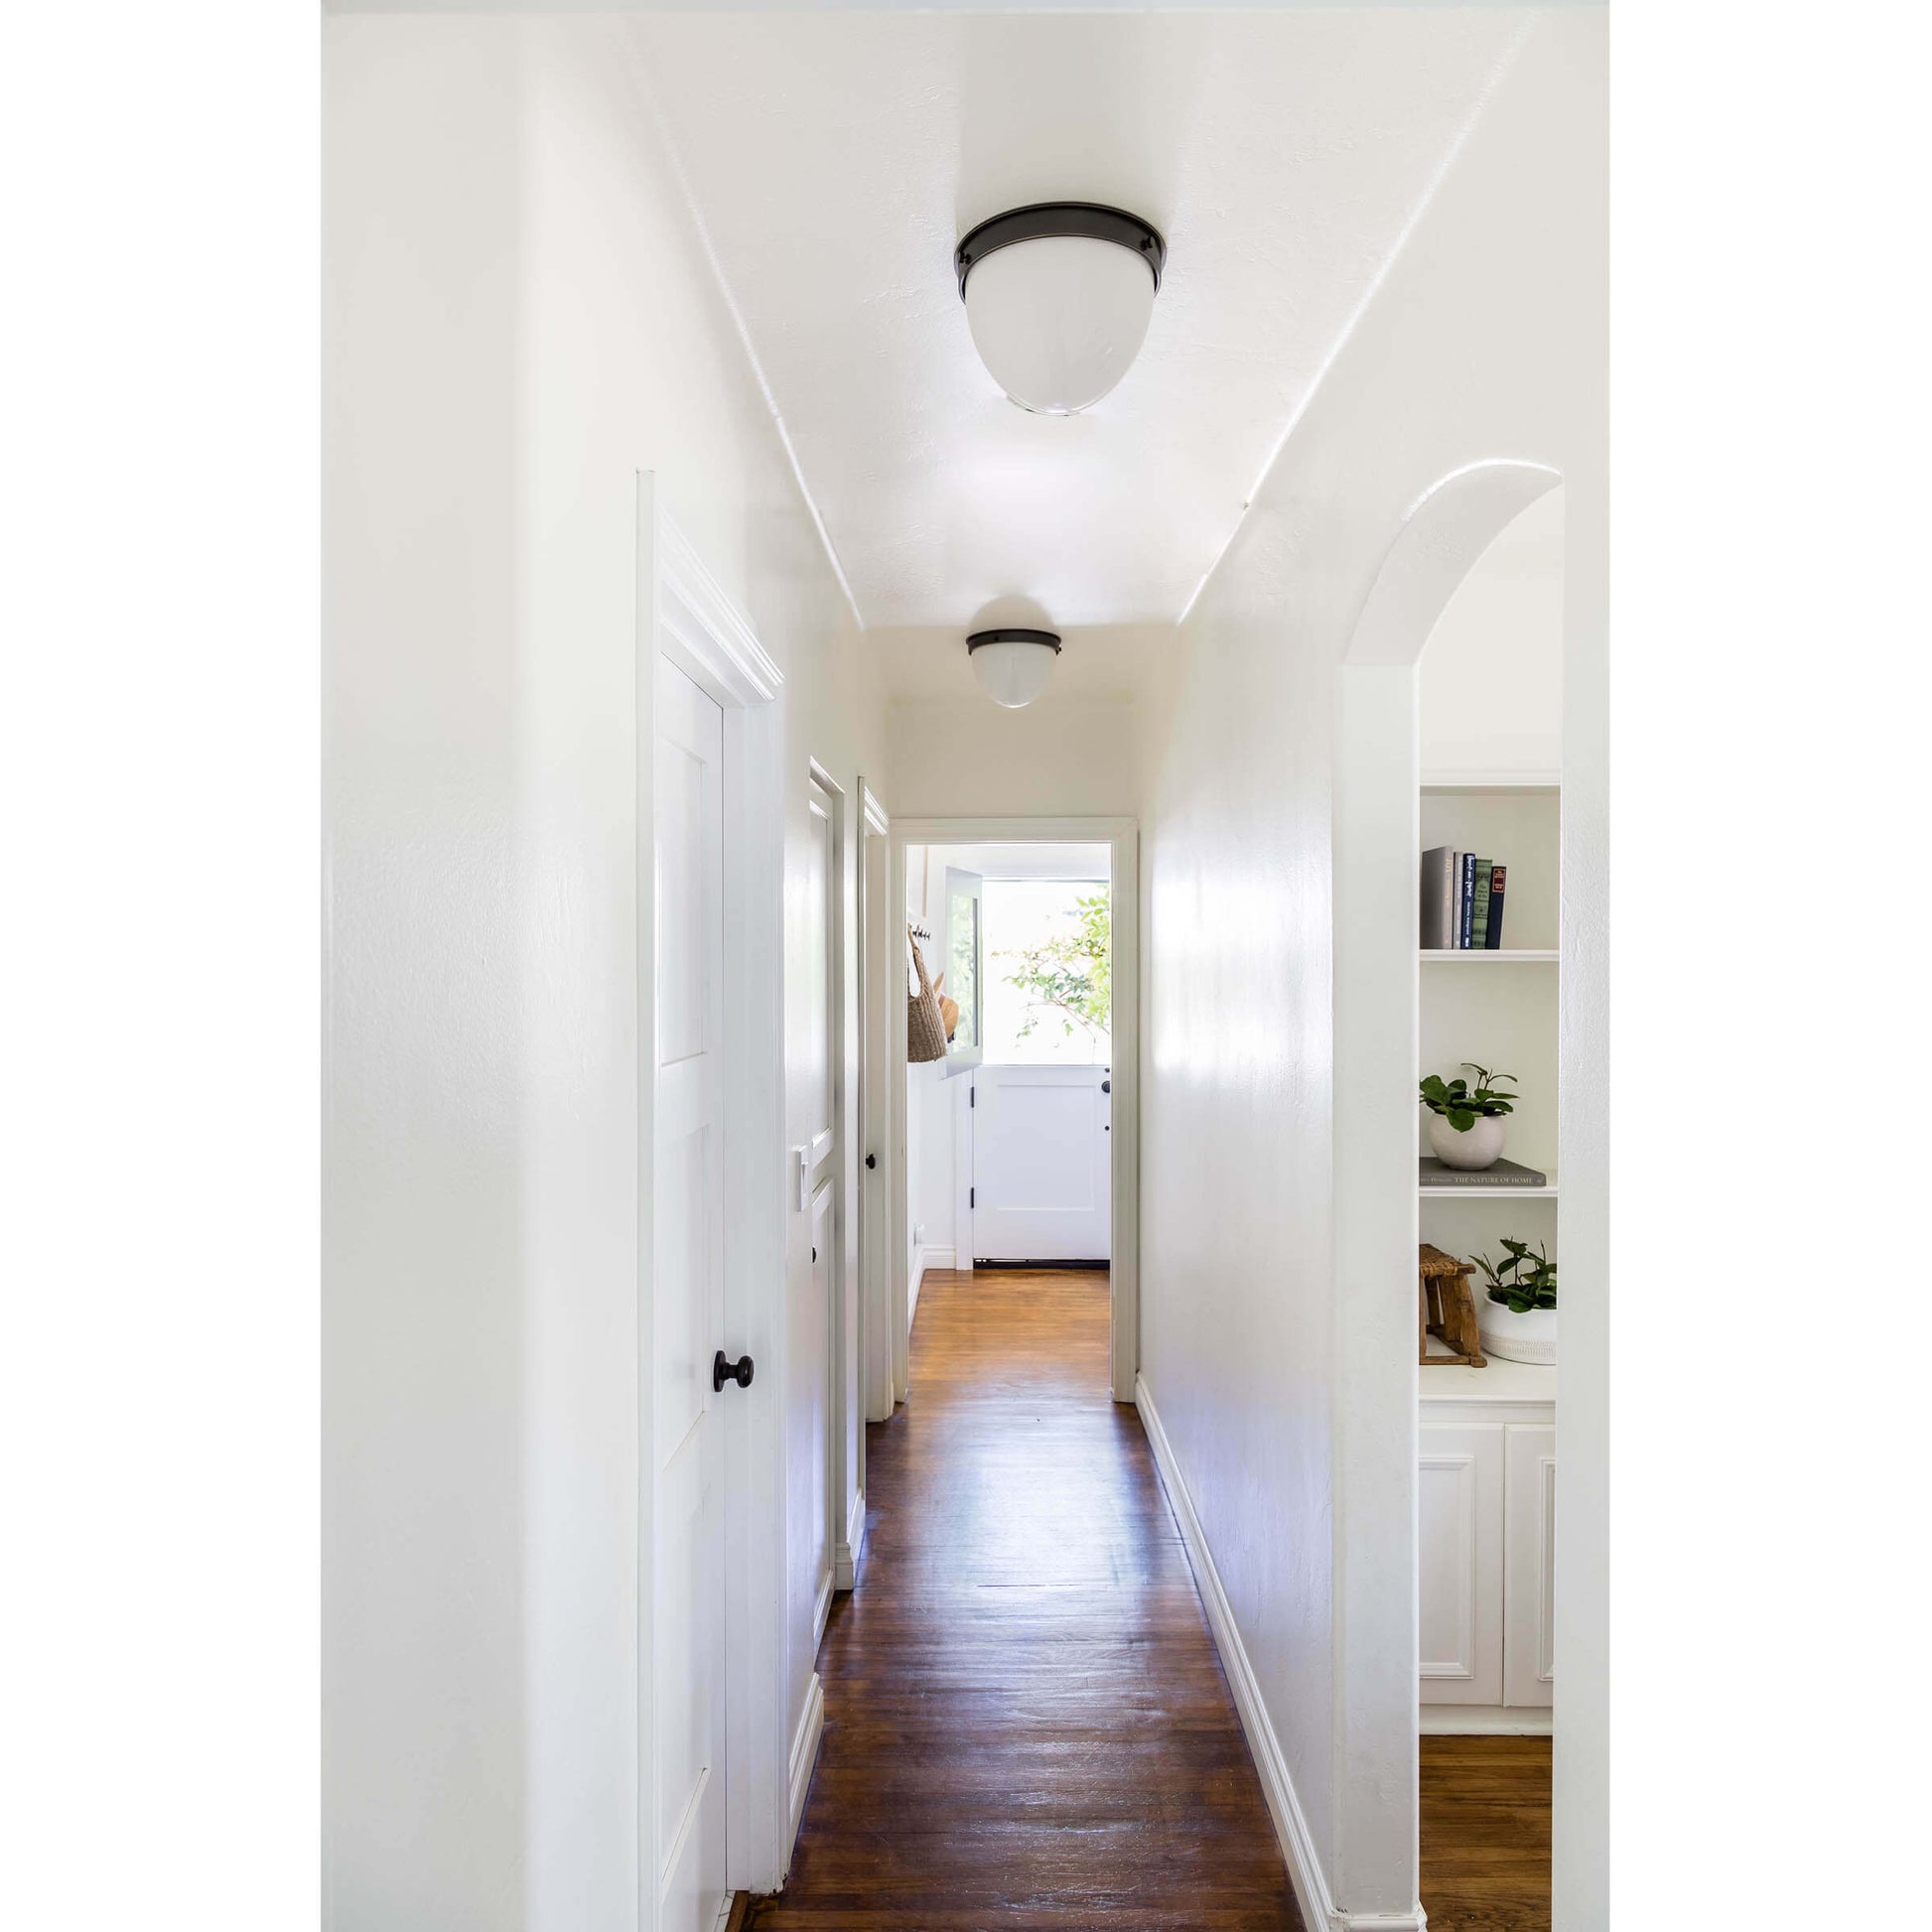 Bay Harbor Flush Mount in Oil Rubbed Bronze by Coastal Living